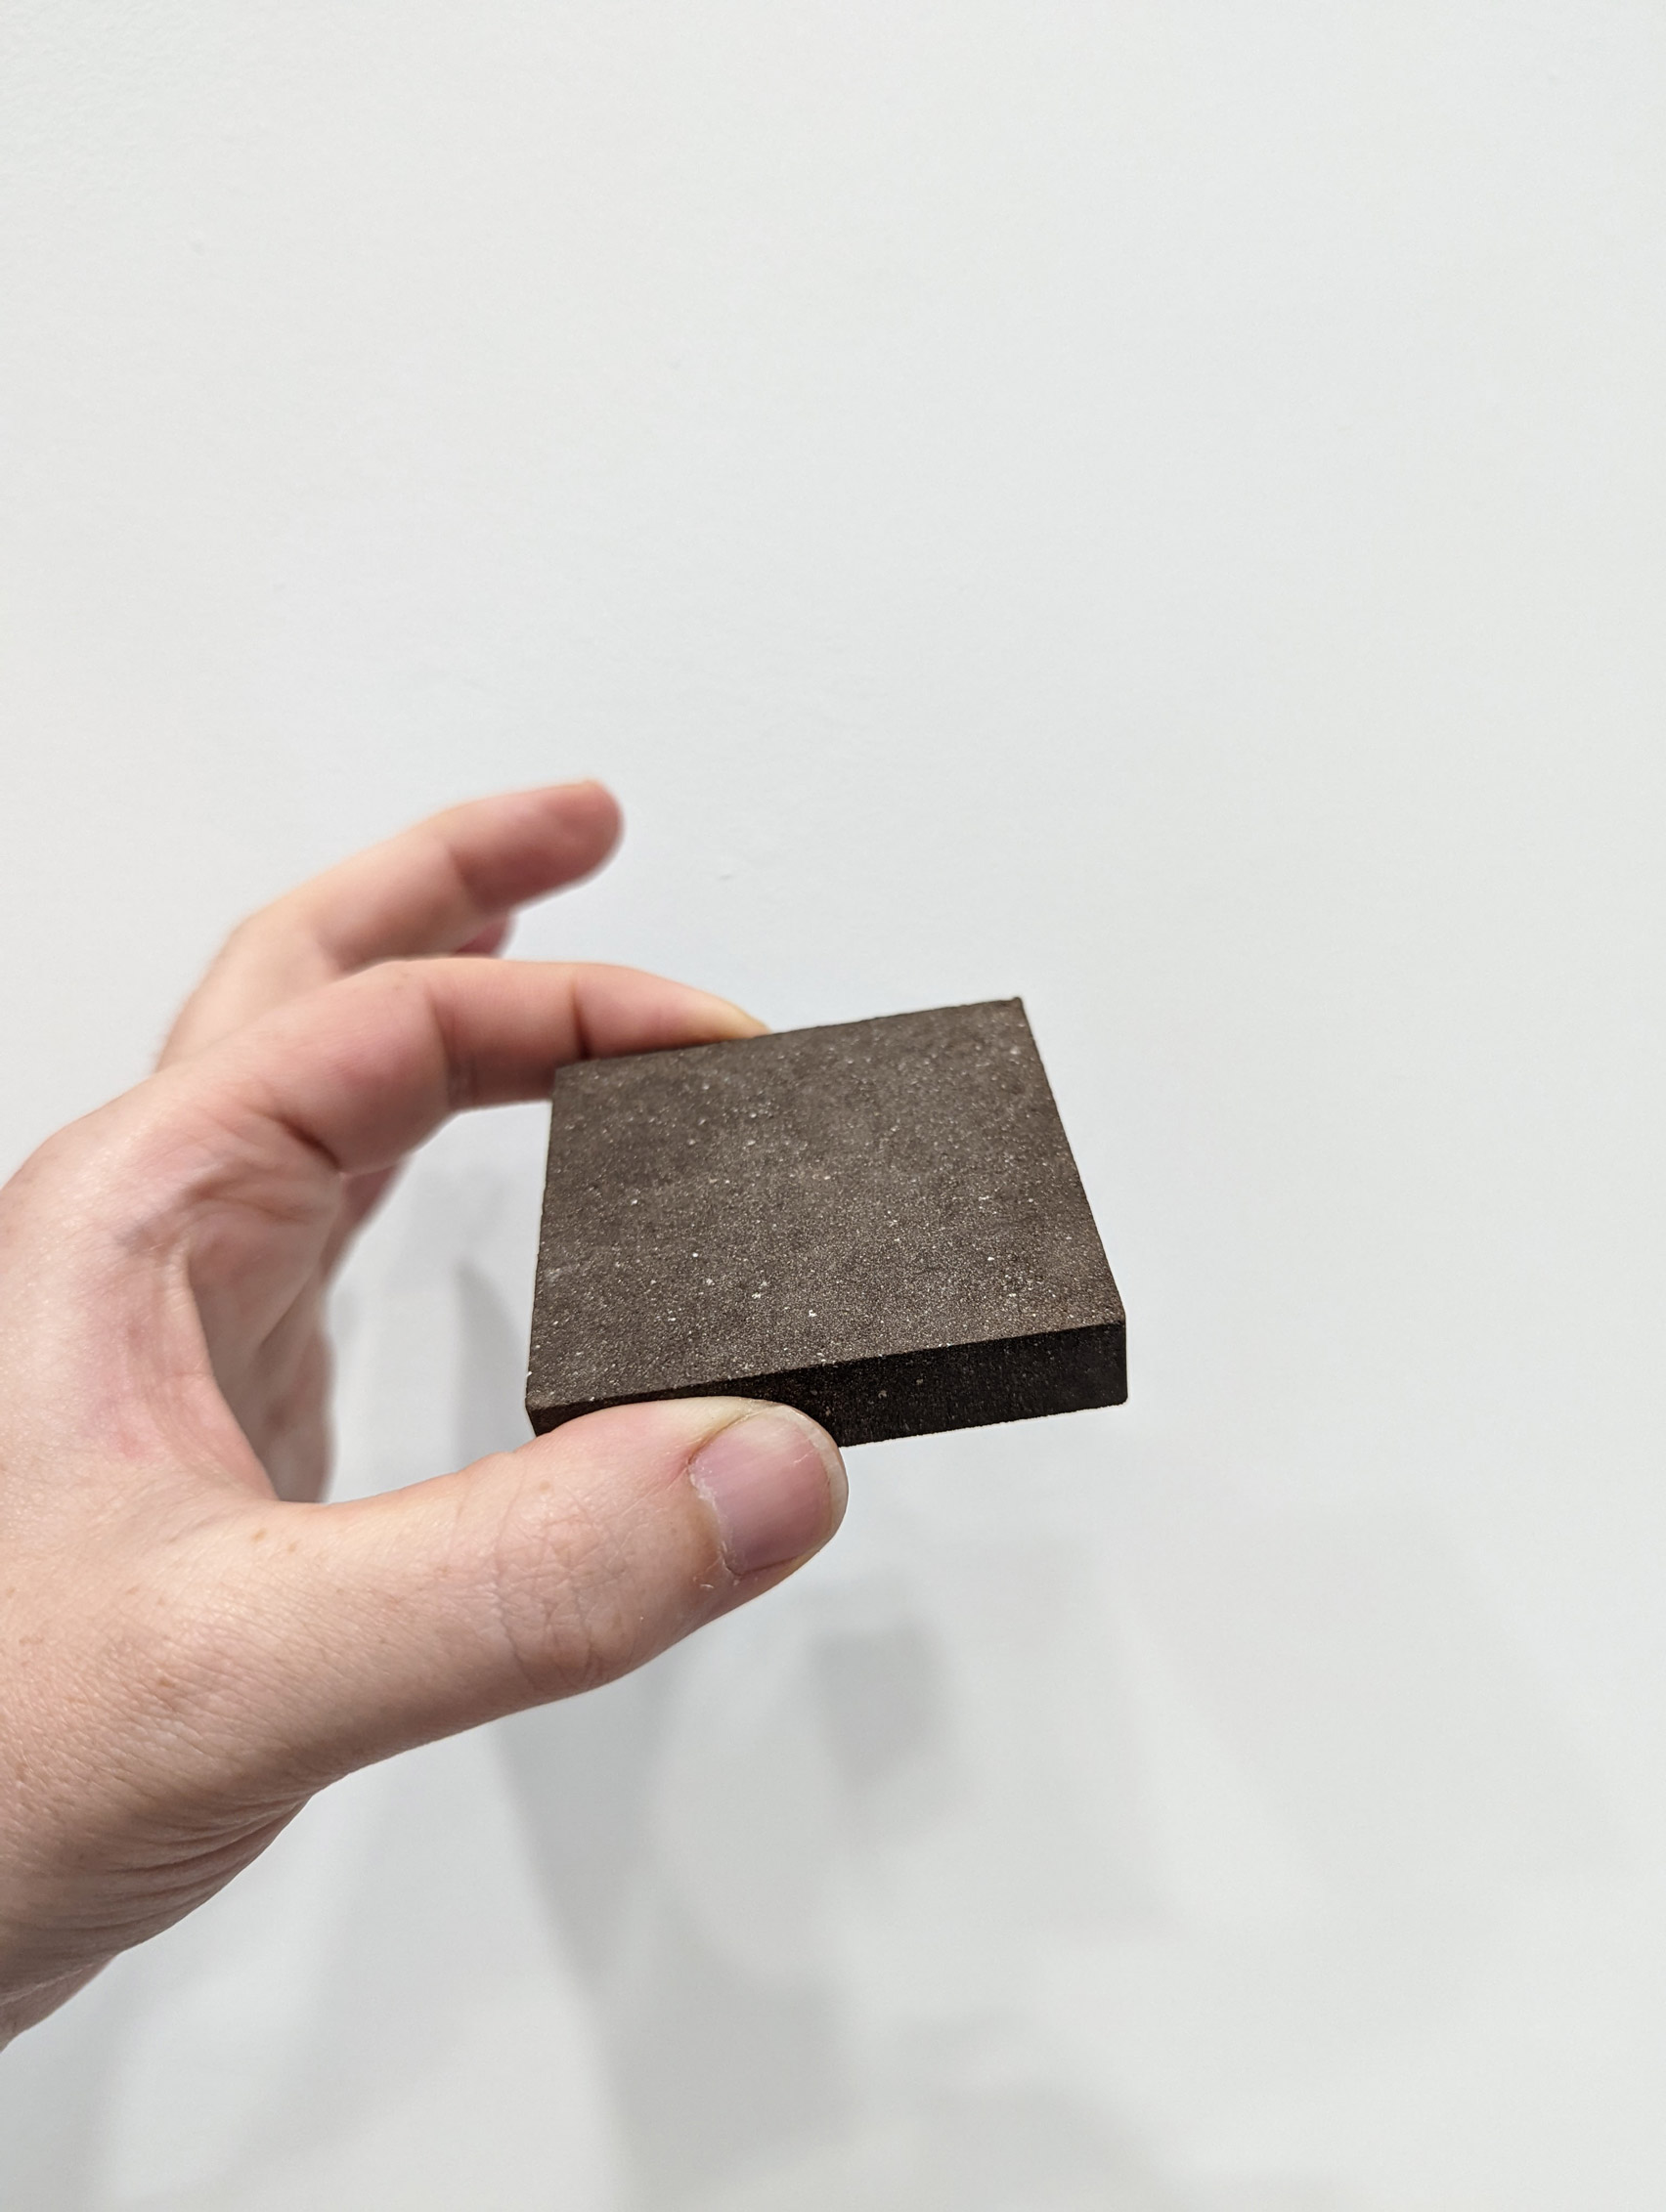 Concrete-like material sample by University of Manchester scientists